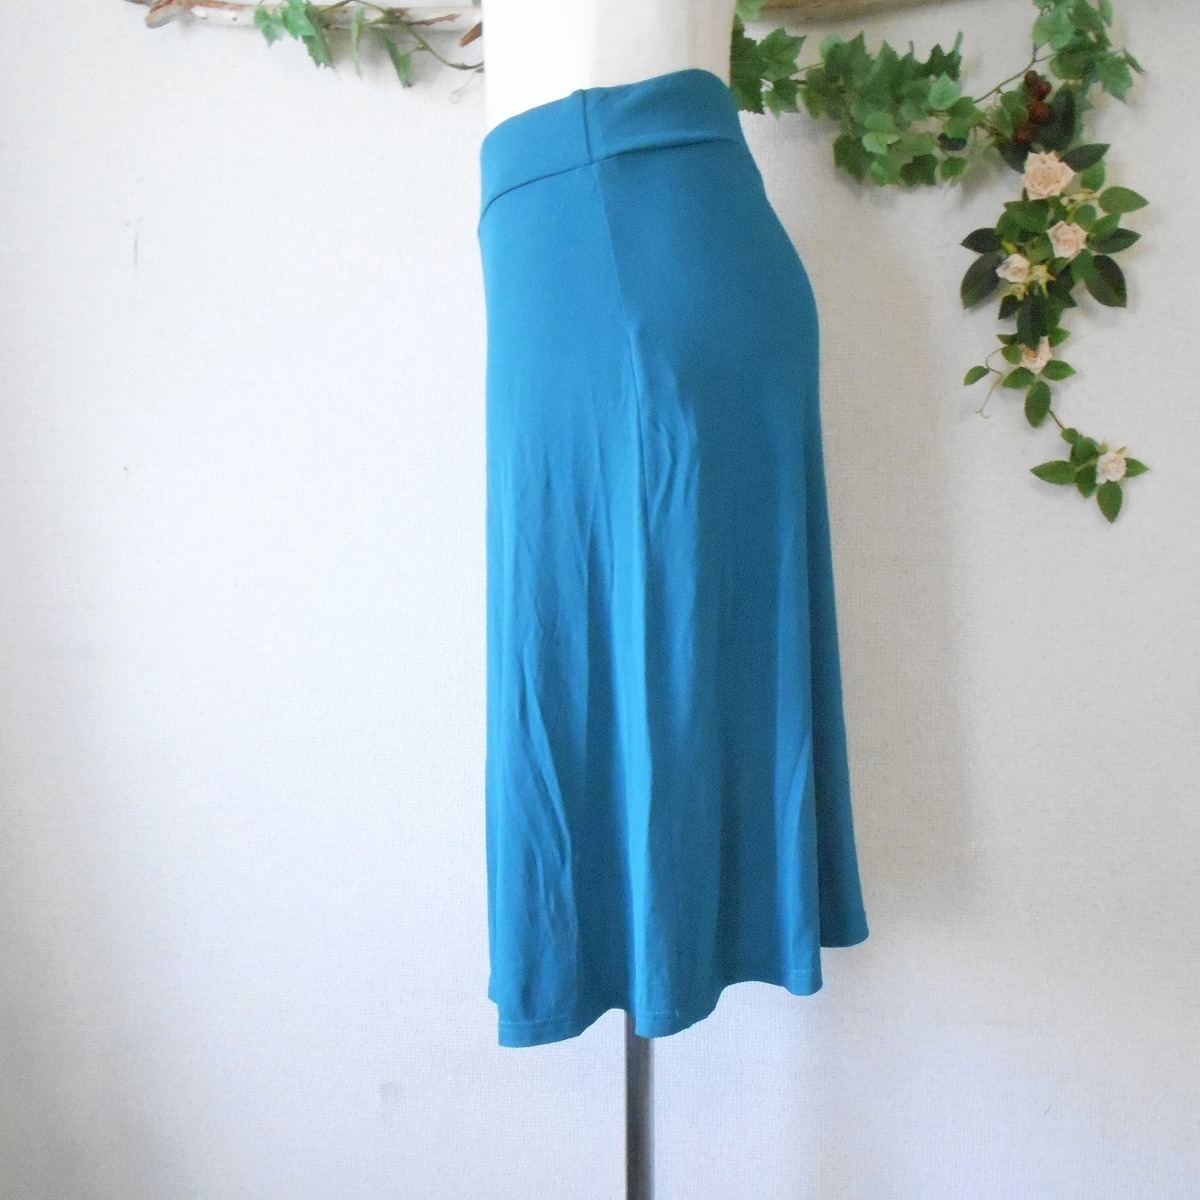  Agnes B agnes b. summer direction lady's for flair skirt 